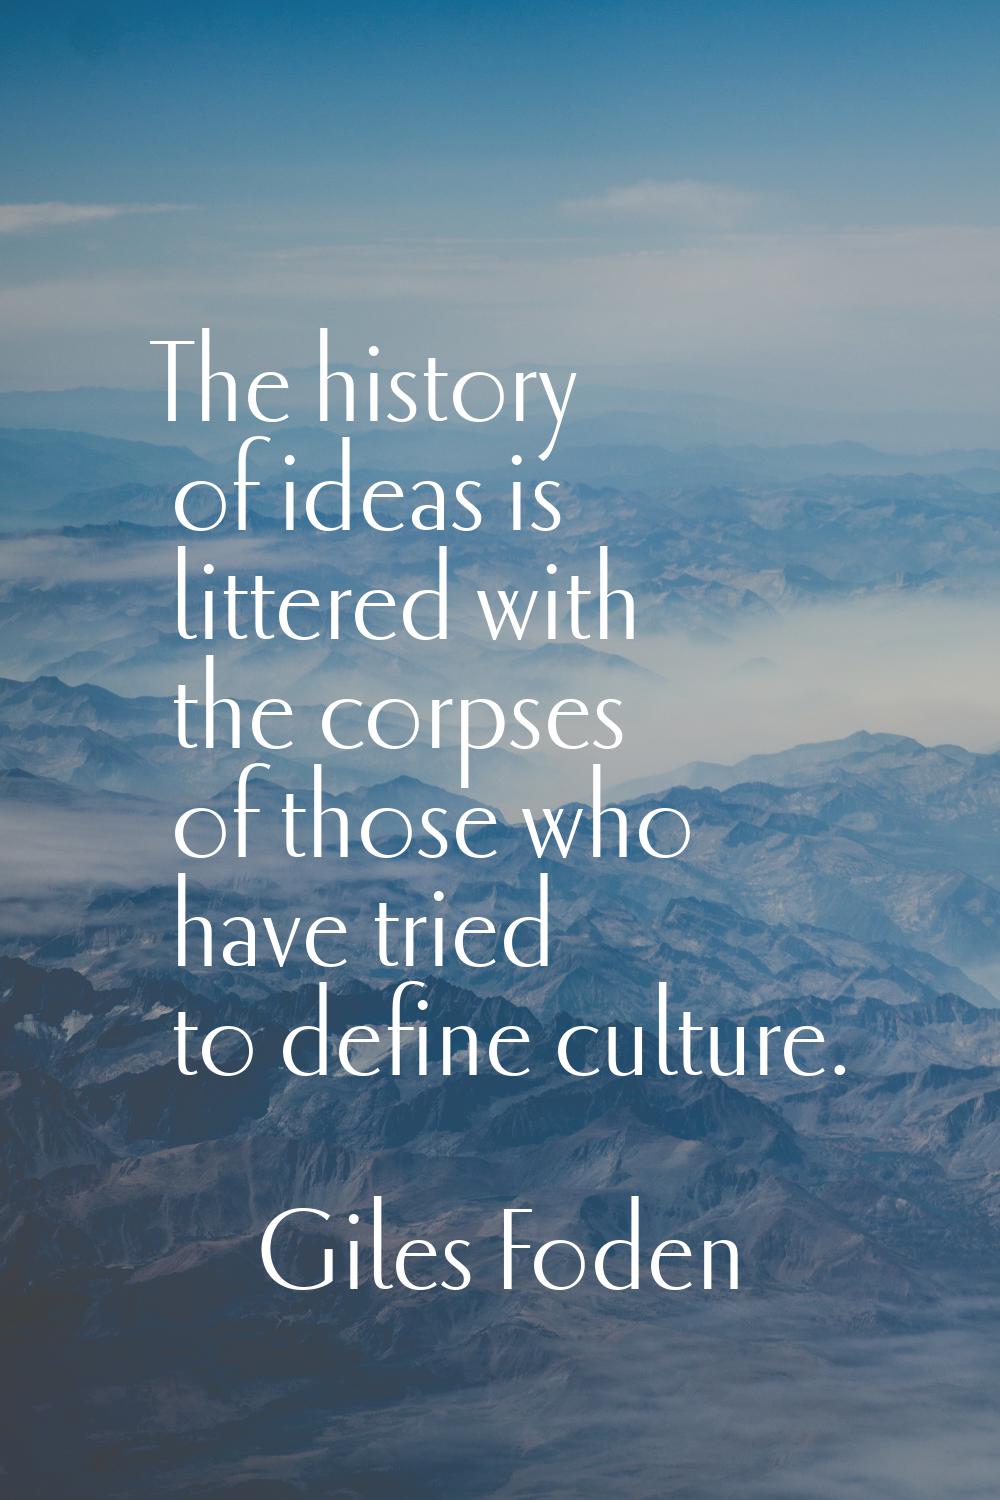 The history of ideas is littered with the corpses of those who have tried to define culture.